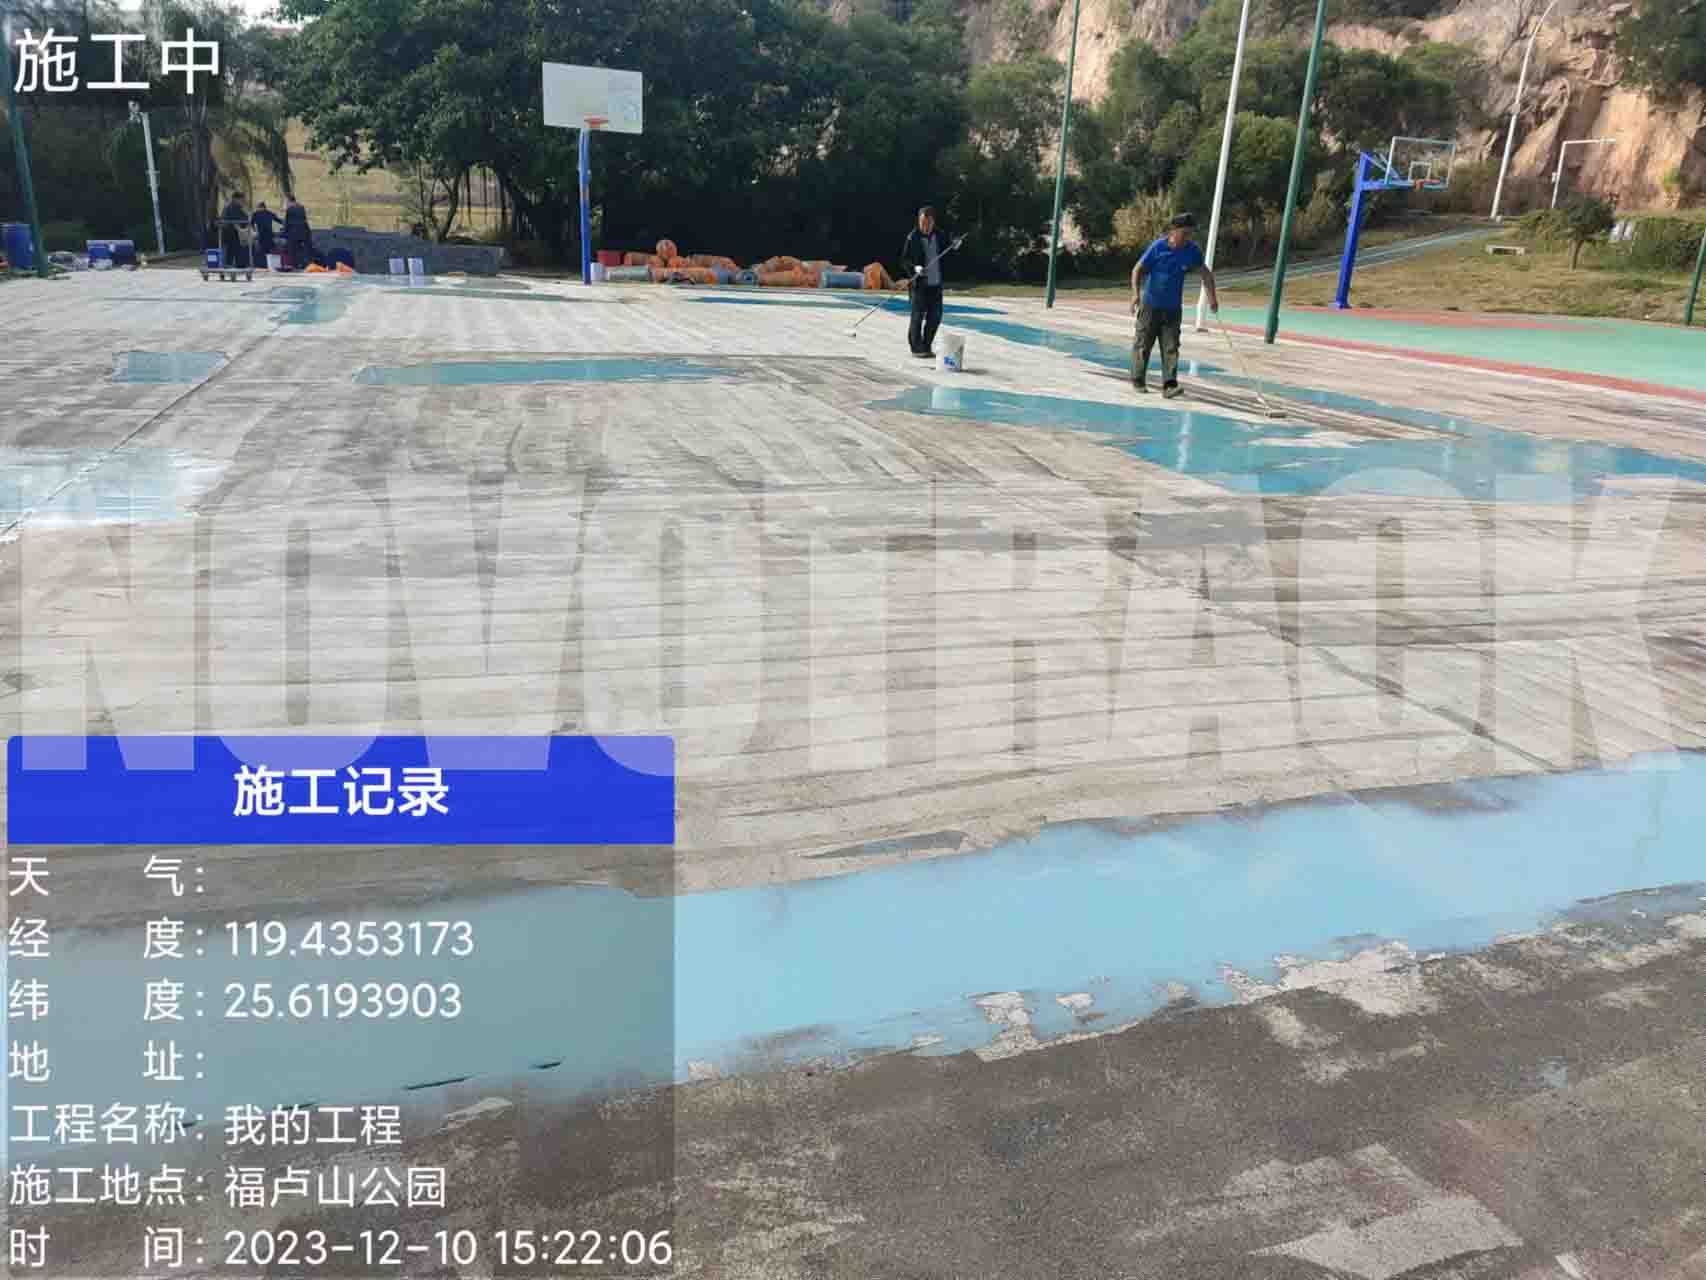 how to build an outdoor basketball court floor